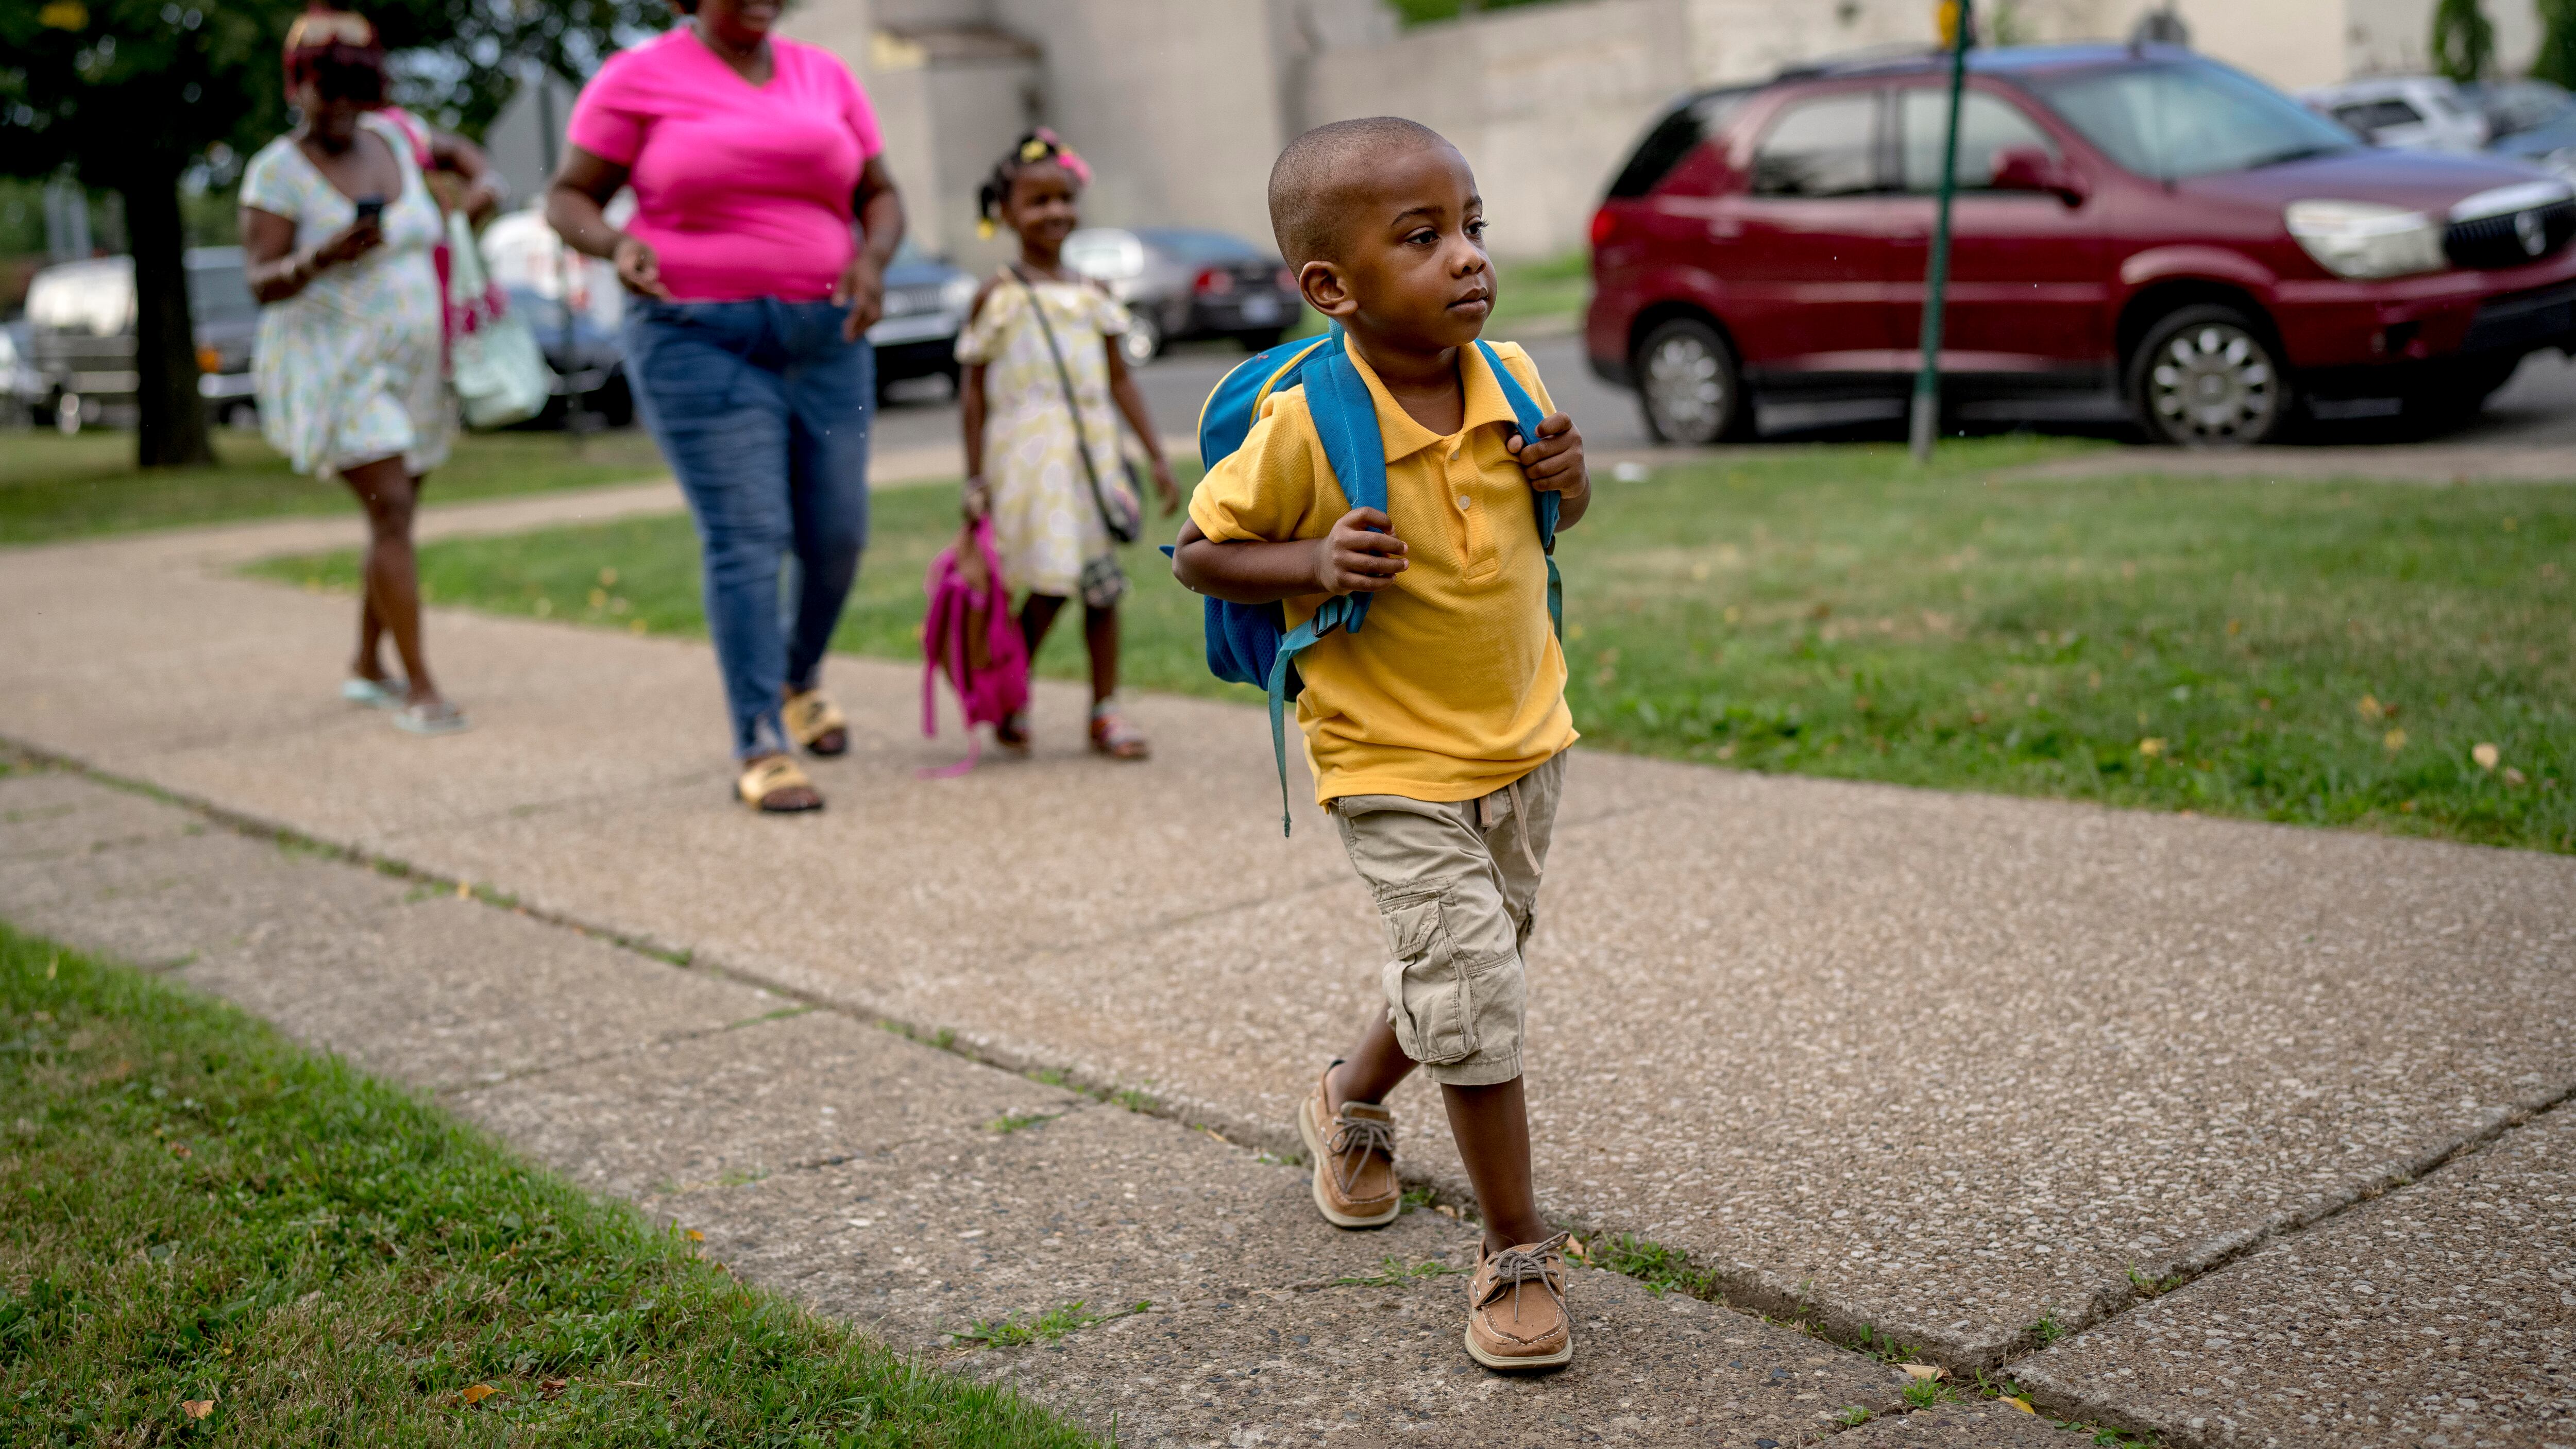 A child wearing a backpack walks toward a school building. Other children and parents can be seen behind him.